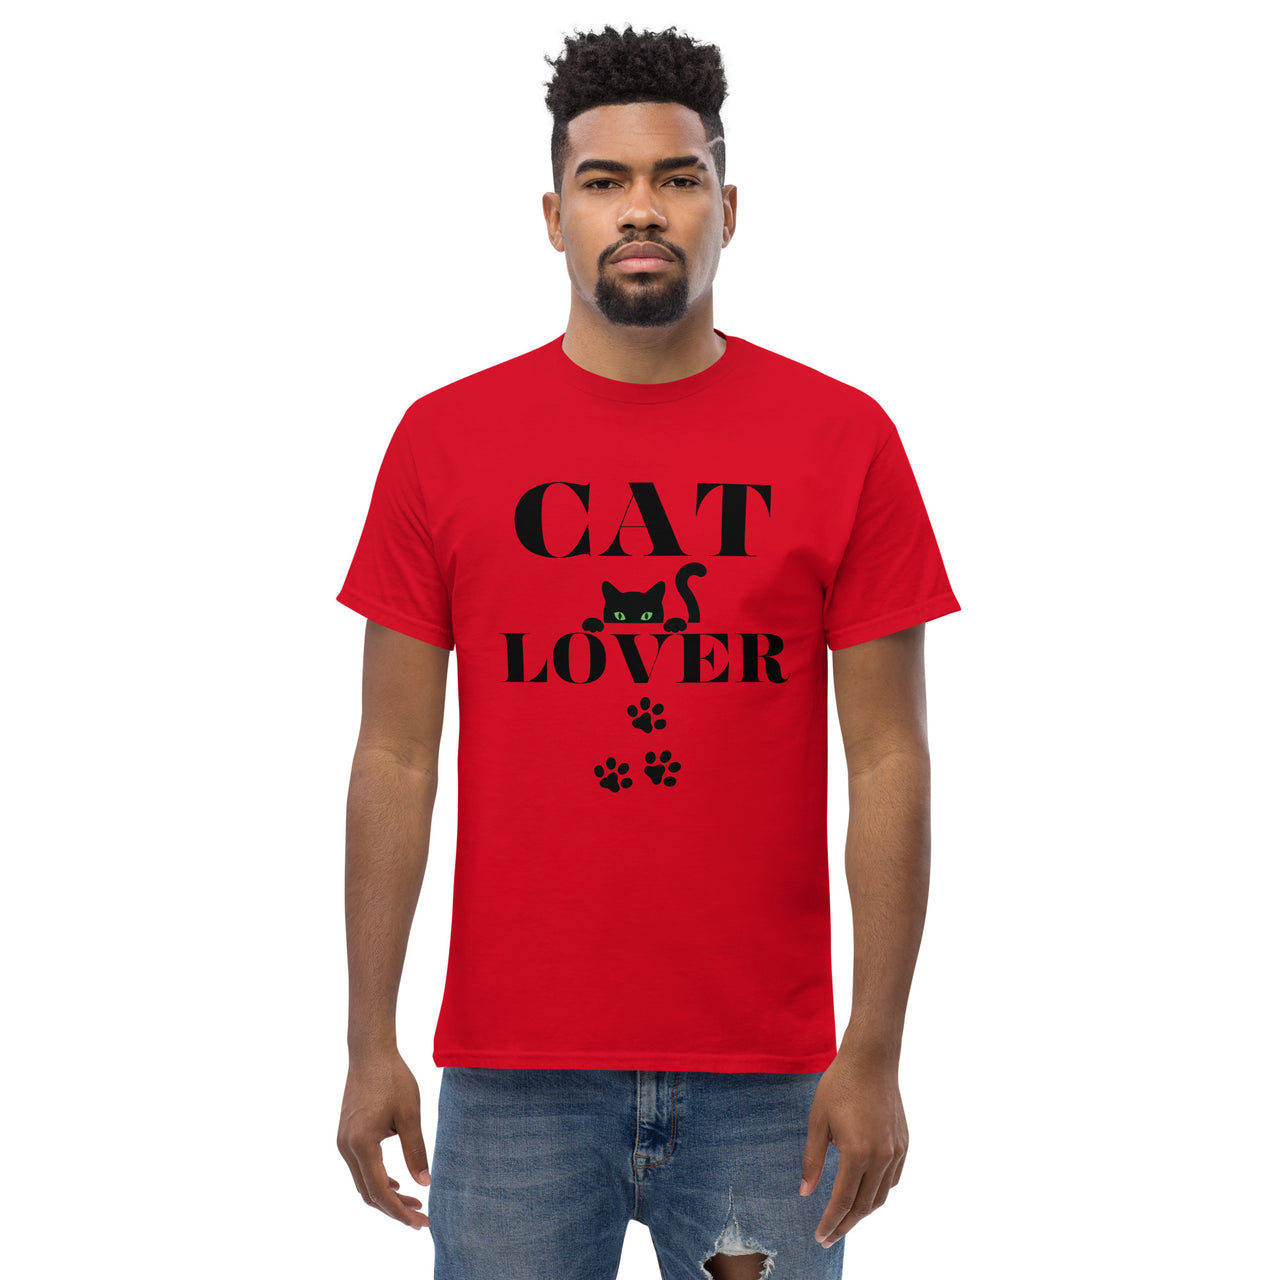 Crazy Cat Lady Cat Daddy Unisex Tshirt For Cat Lovers - Cat Mom - Pet Lover